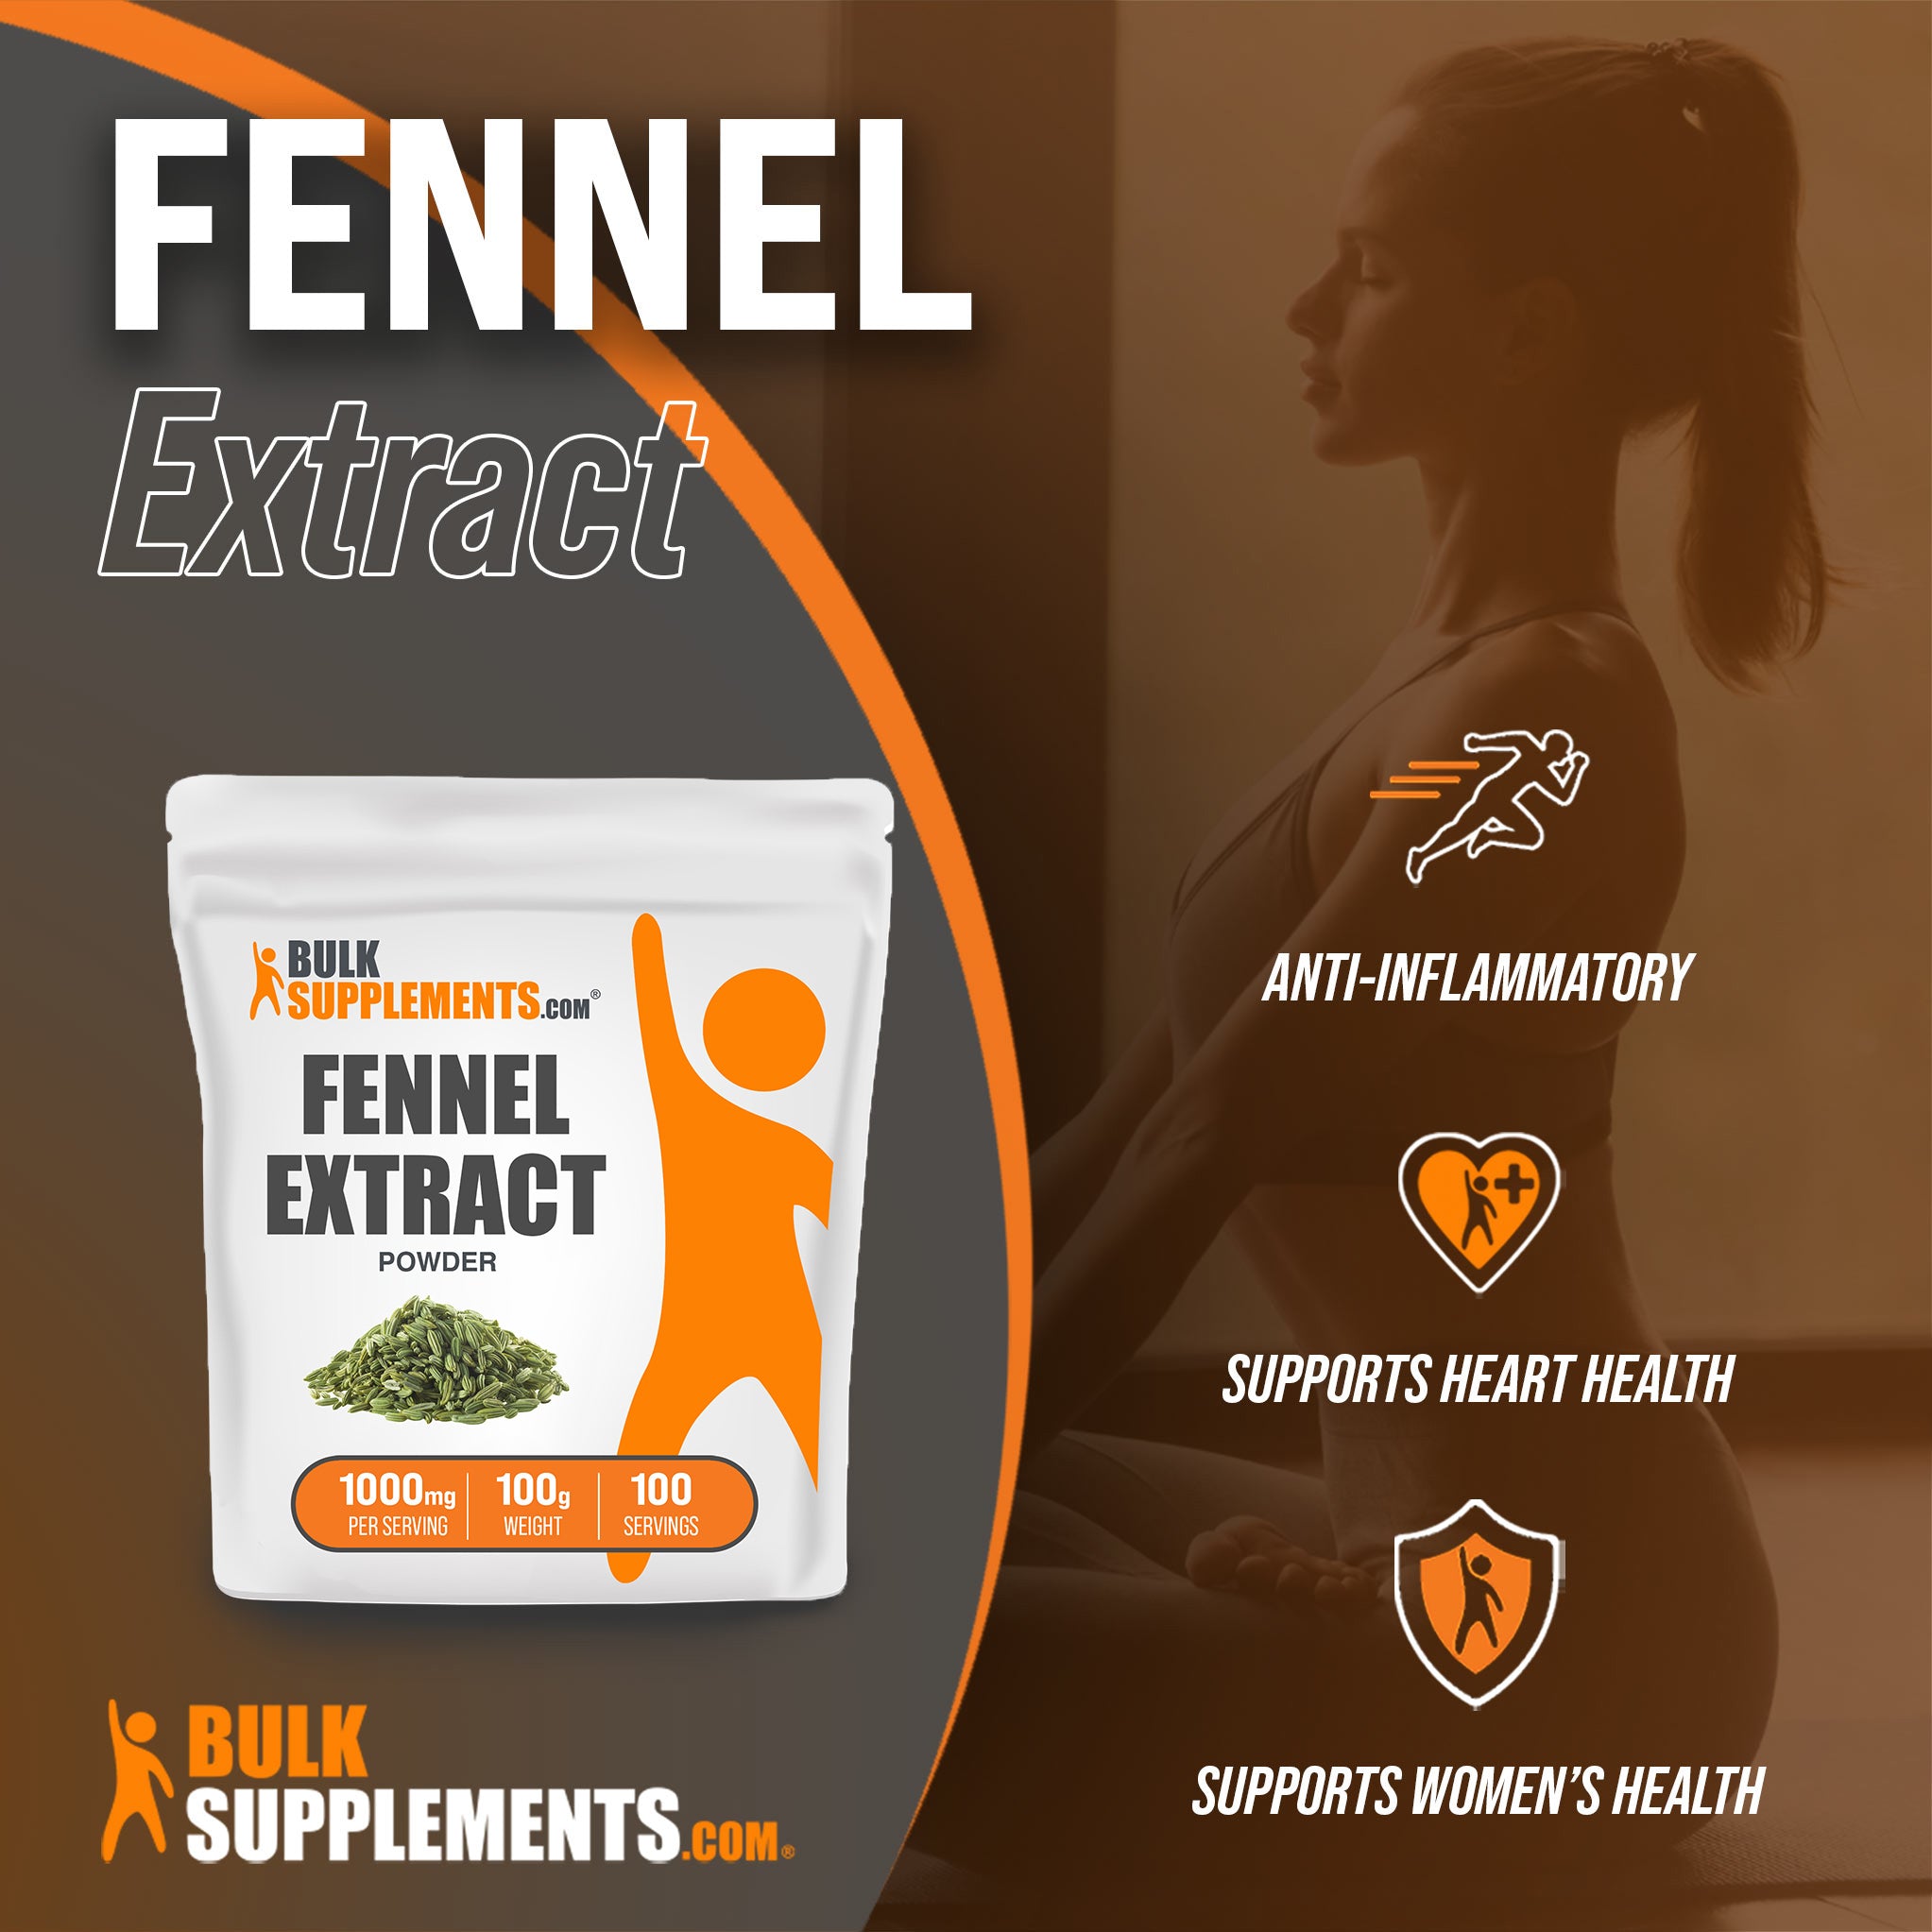 Benefits of Fennel Extract; anti-inflammatory, supports heart health, supports women's health